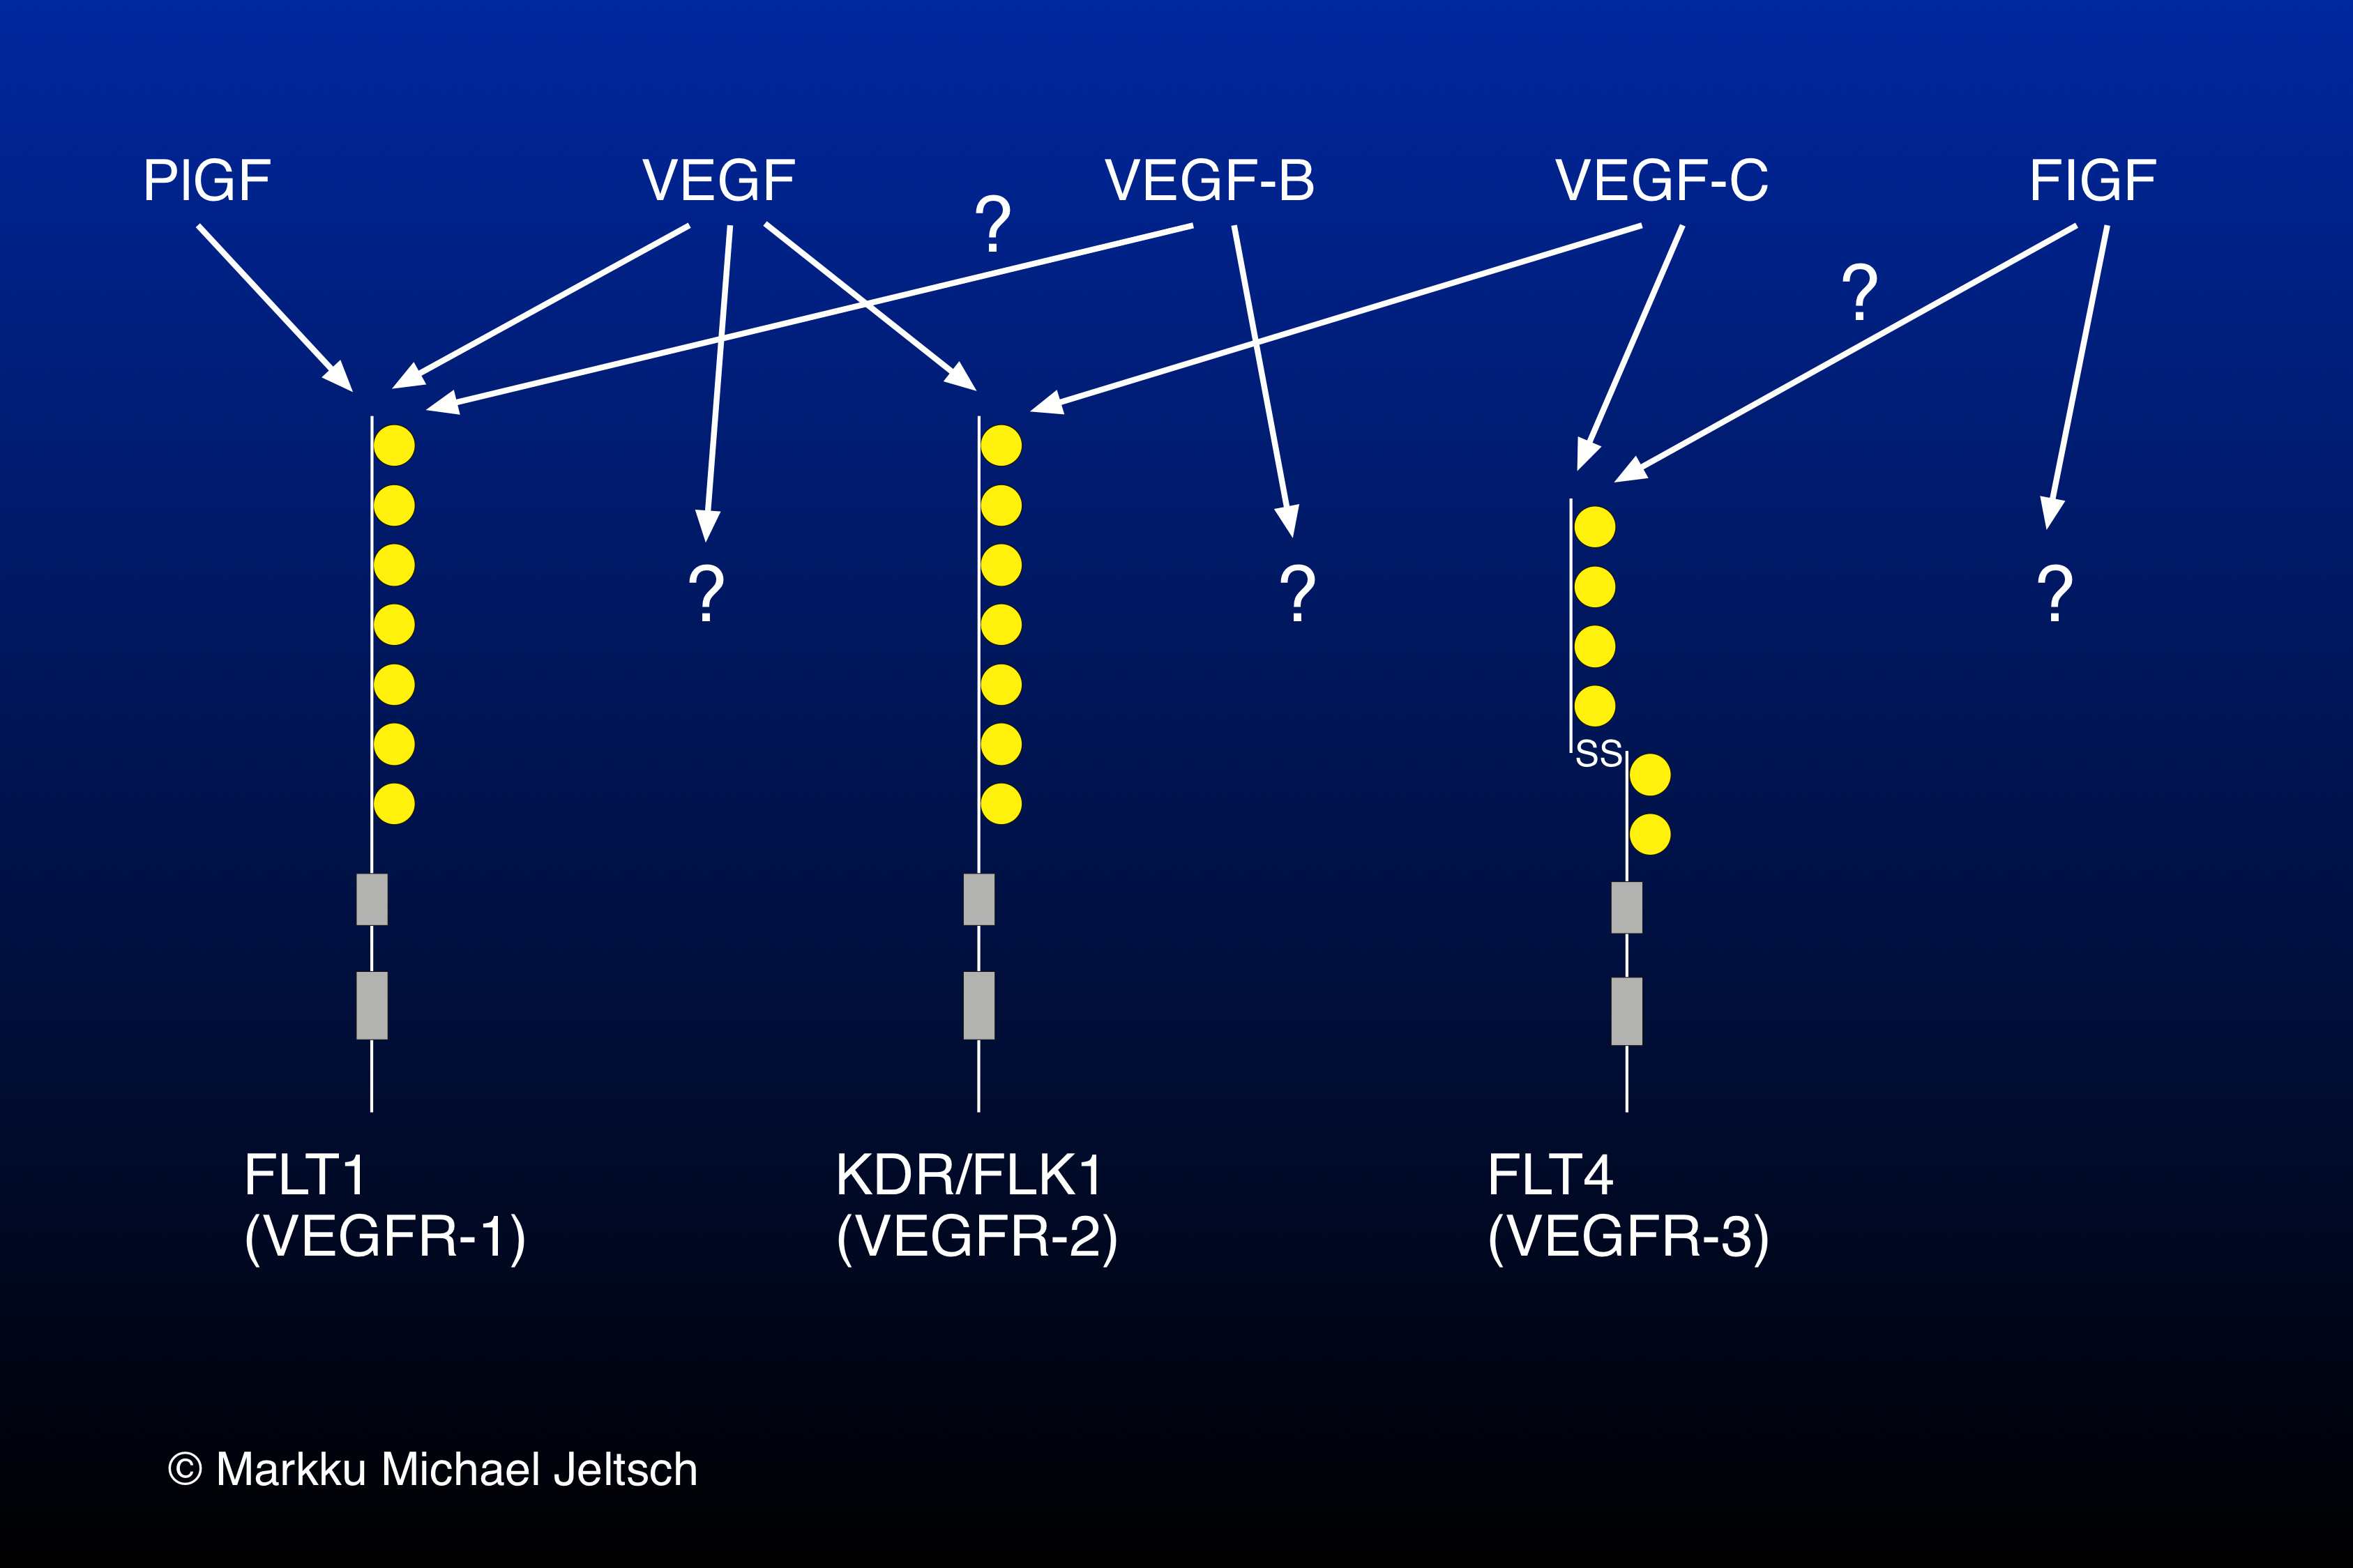 receptor specificity within the VEGF family